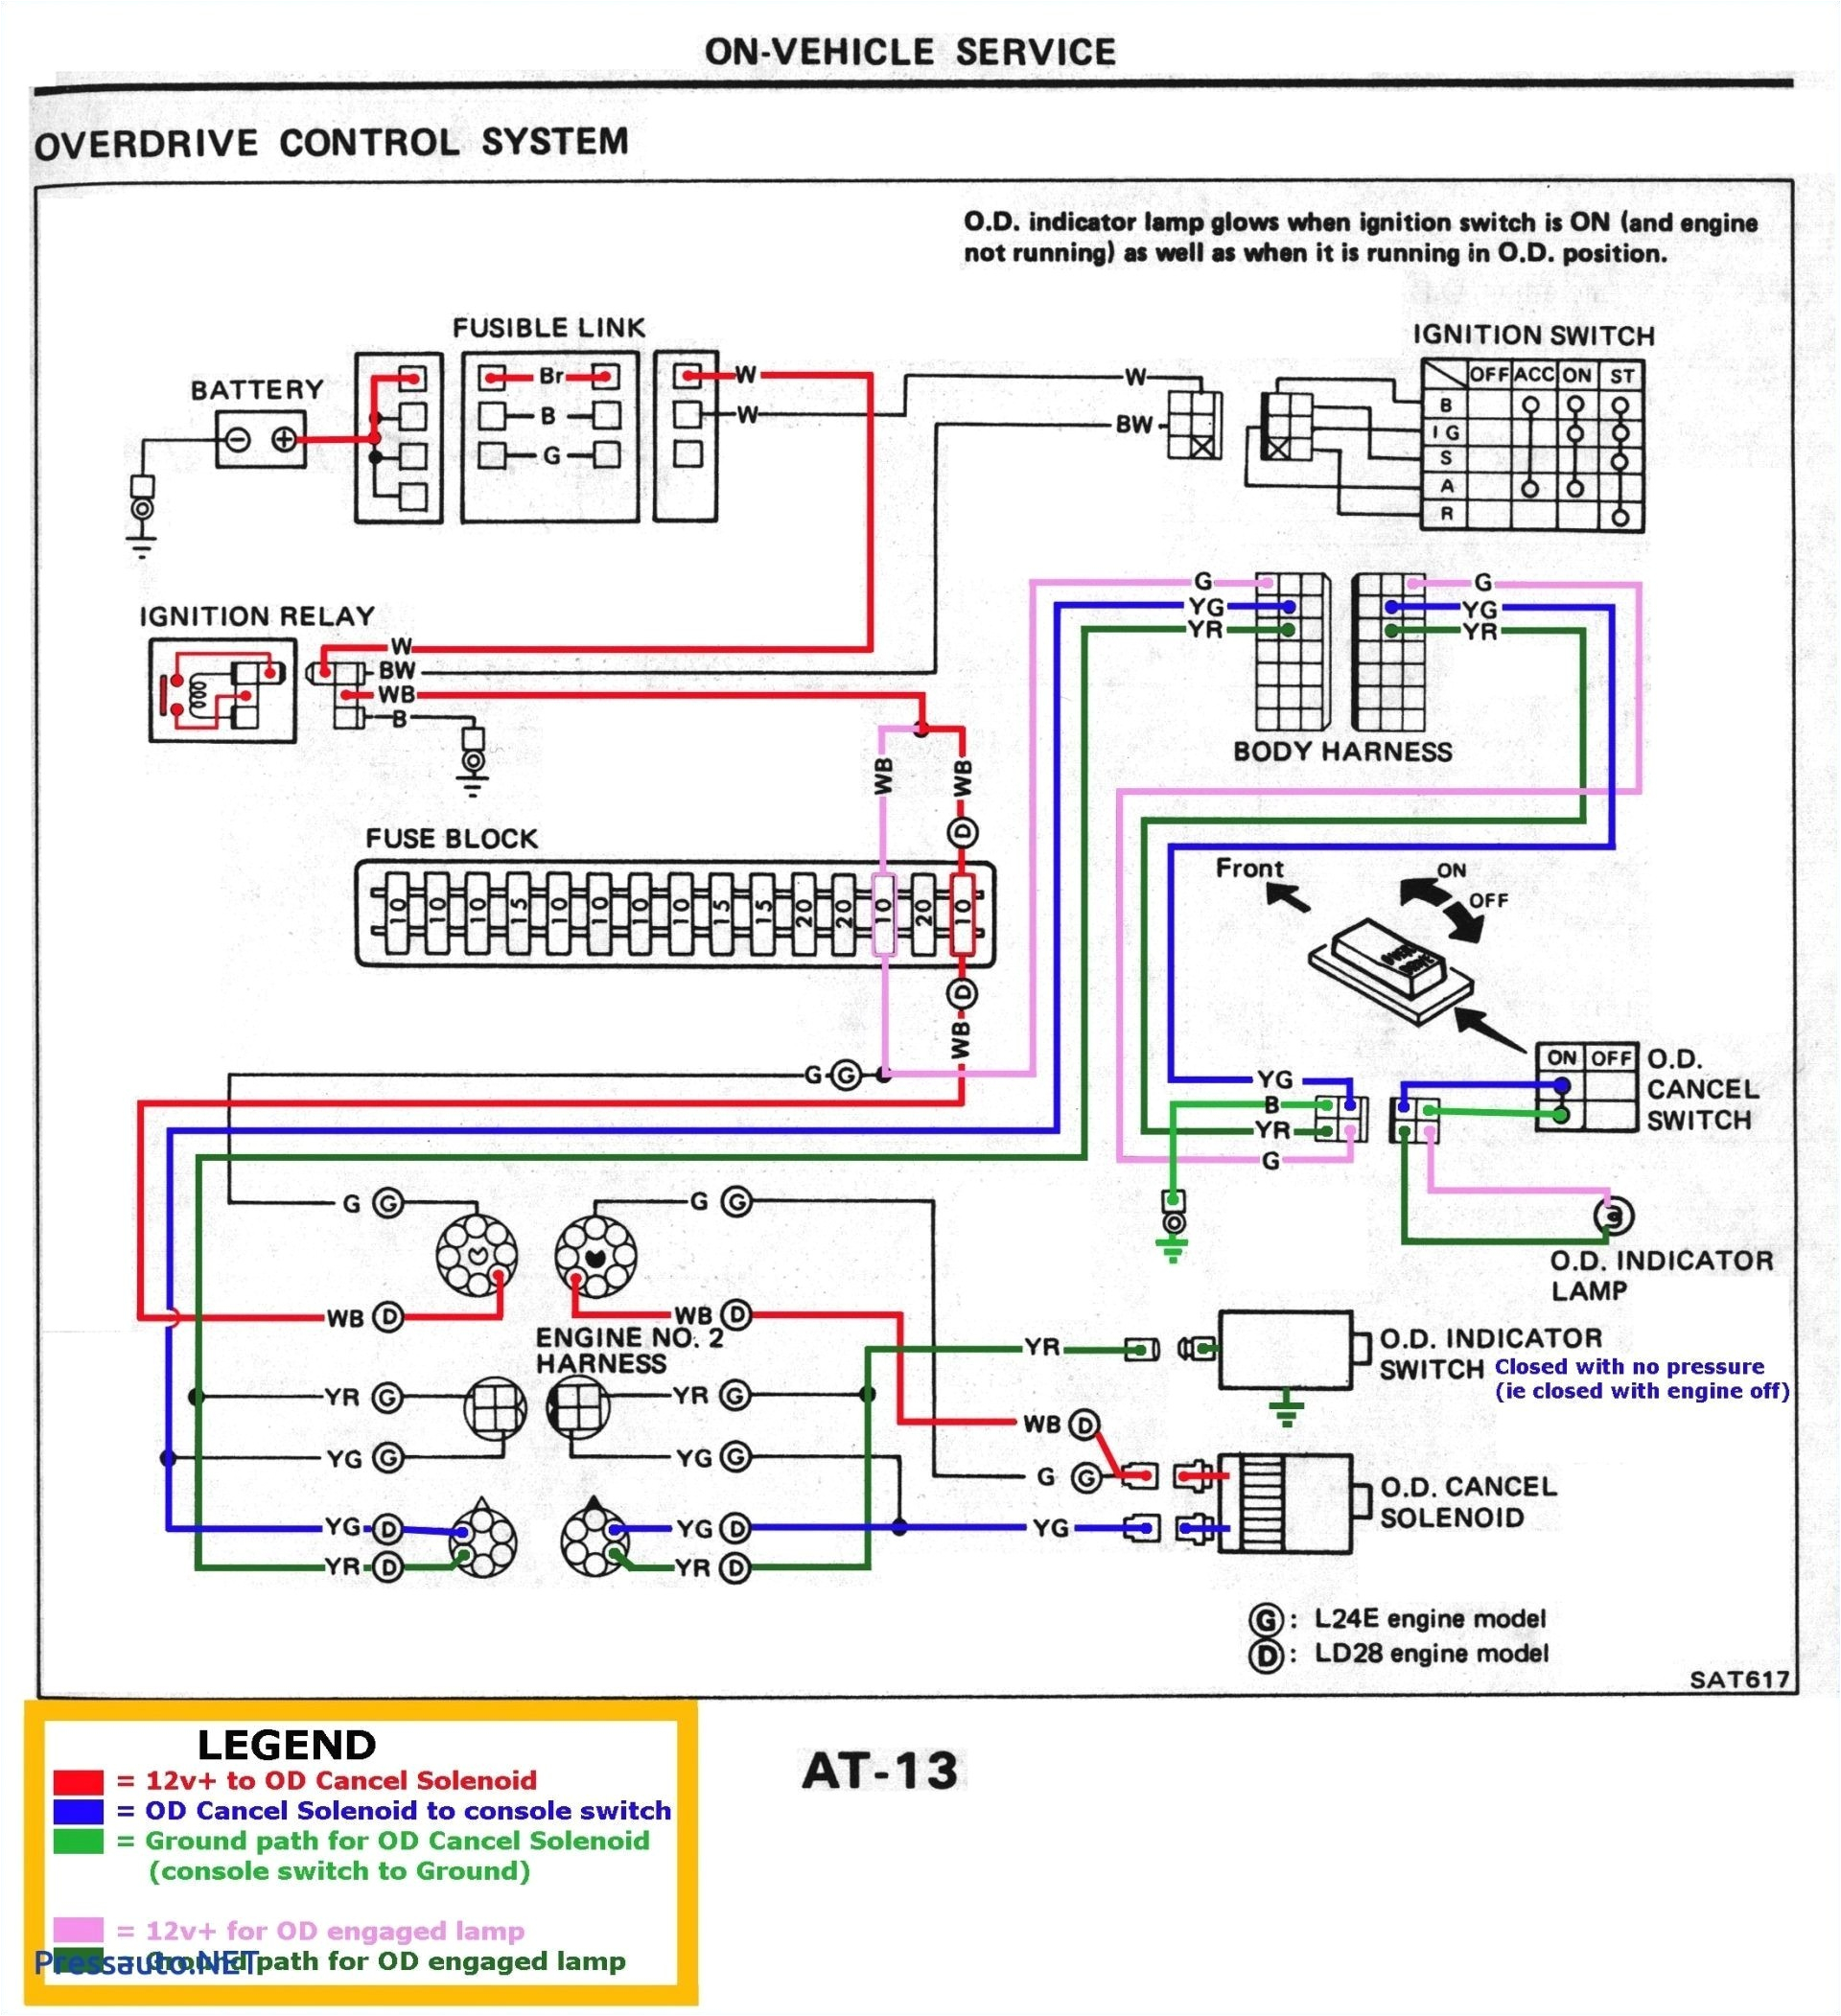 Ignition Coil Wiring Diagram Manual Gl1200 Ignition Switch Wiring Diagram Wiring Diagram Paper